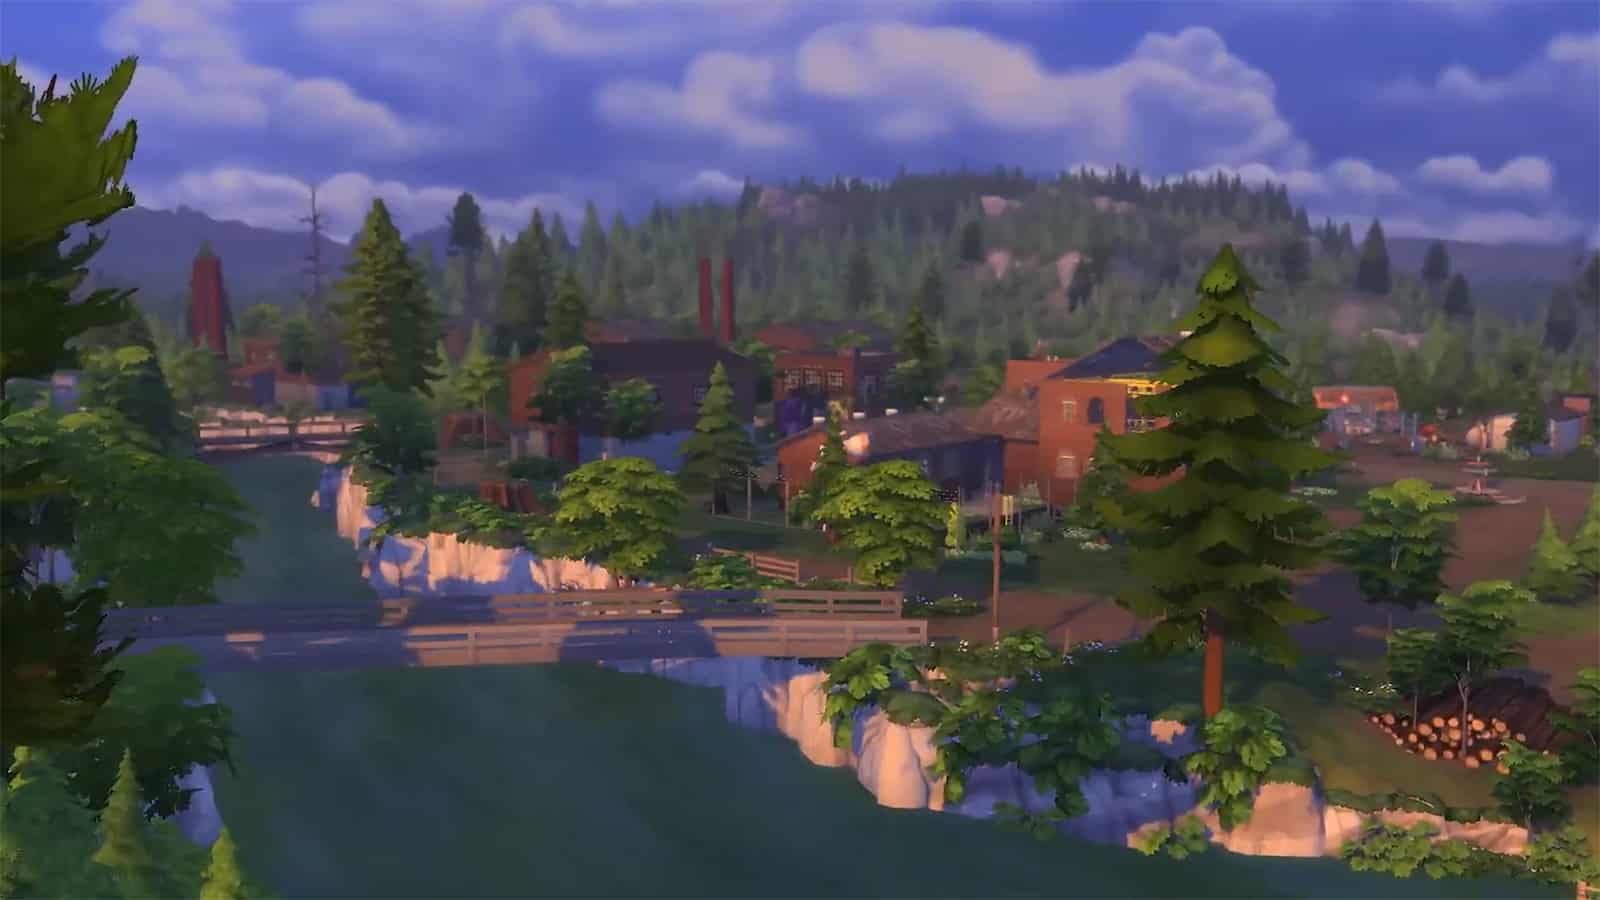 Moonwood Mill in The Sims 4